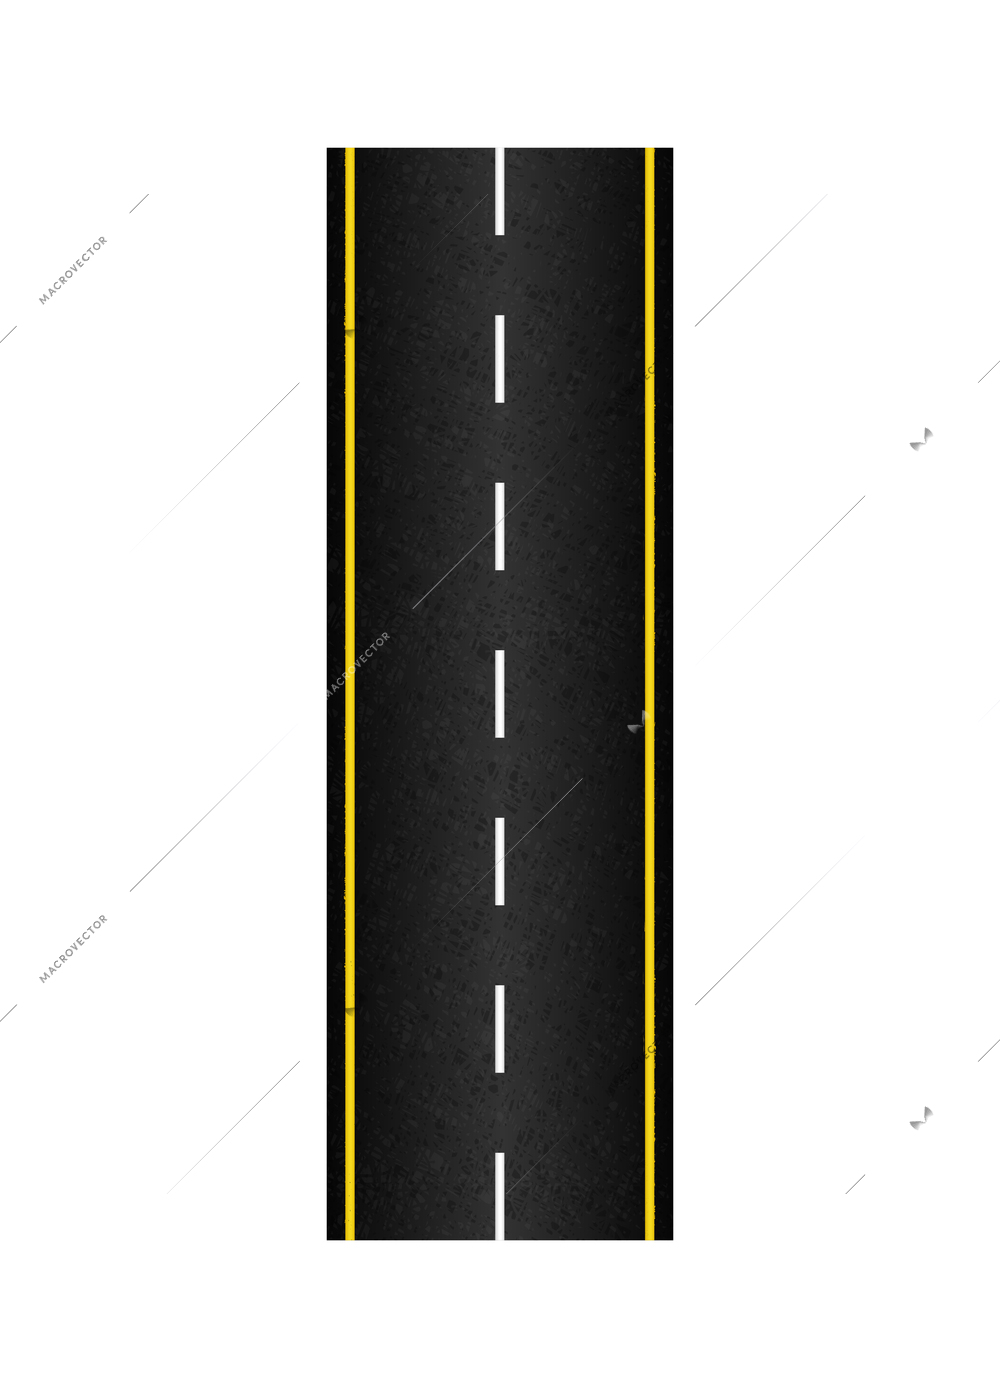 Road cars trees top view composition with isolated image of street constructor element vector illustration